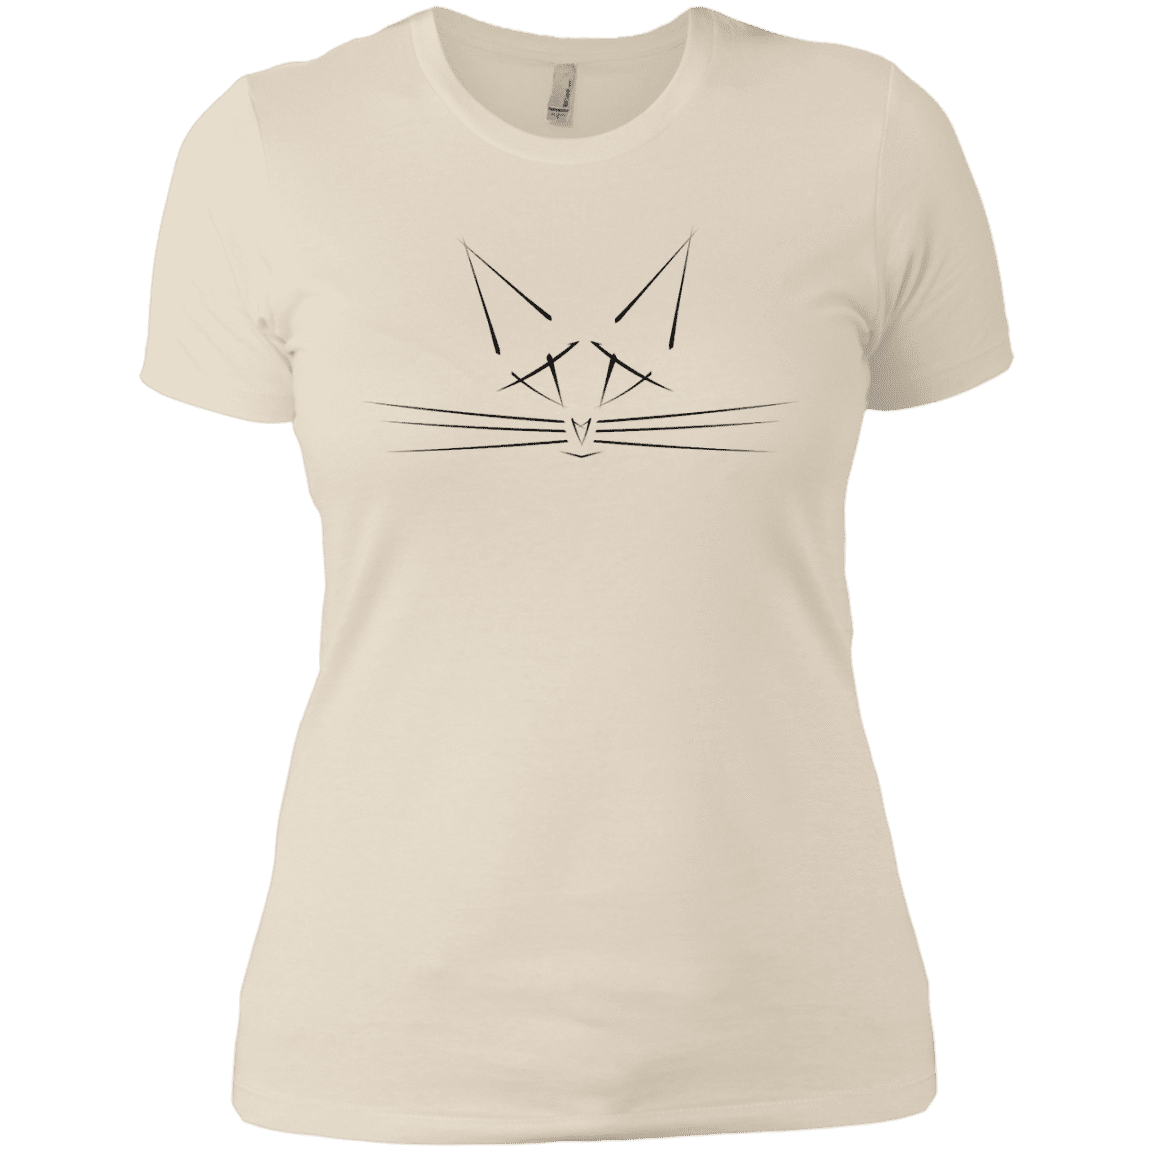 T-Shirts Ivory/ / X-Small Whiskers Women's Premium T-Shirt